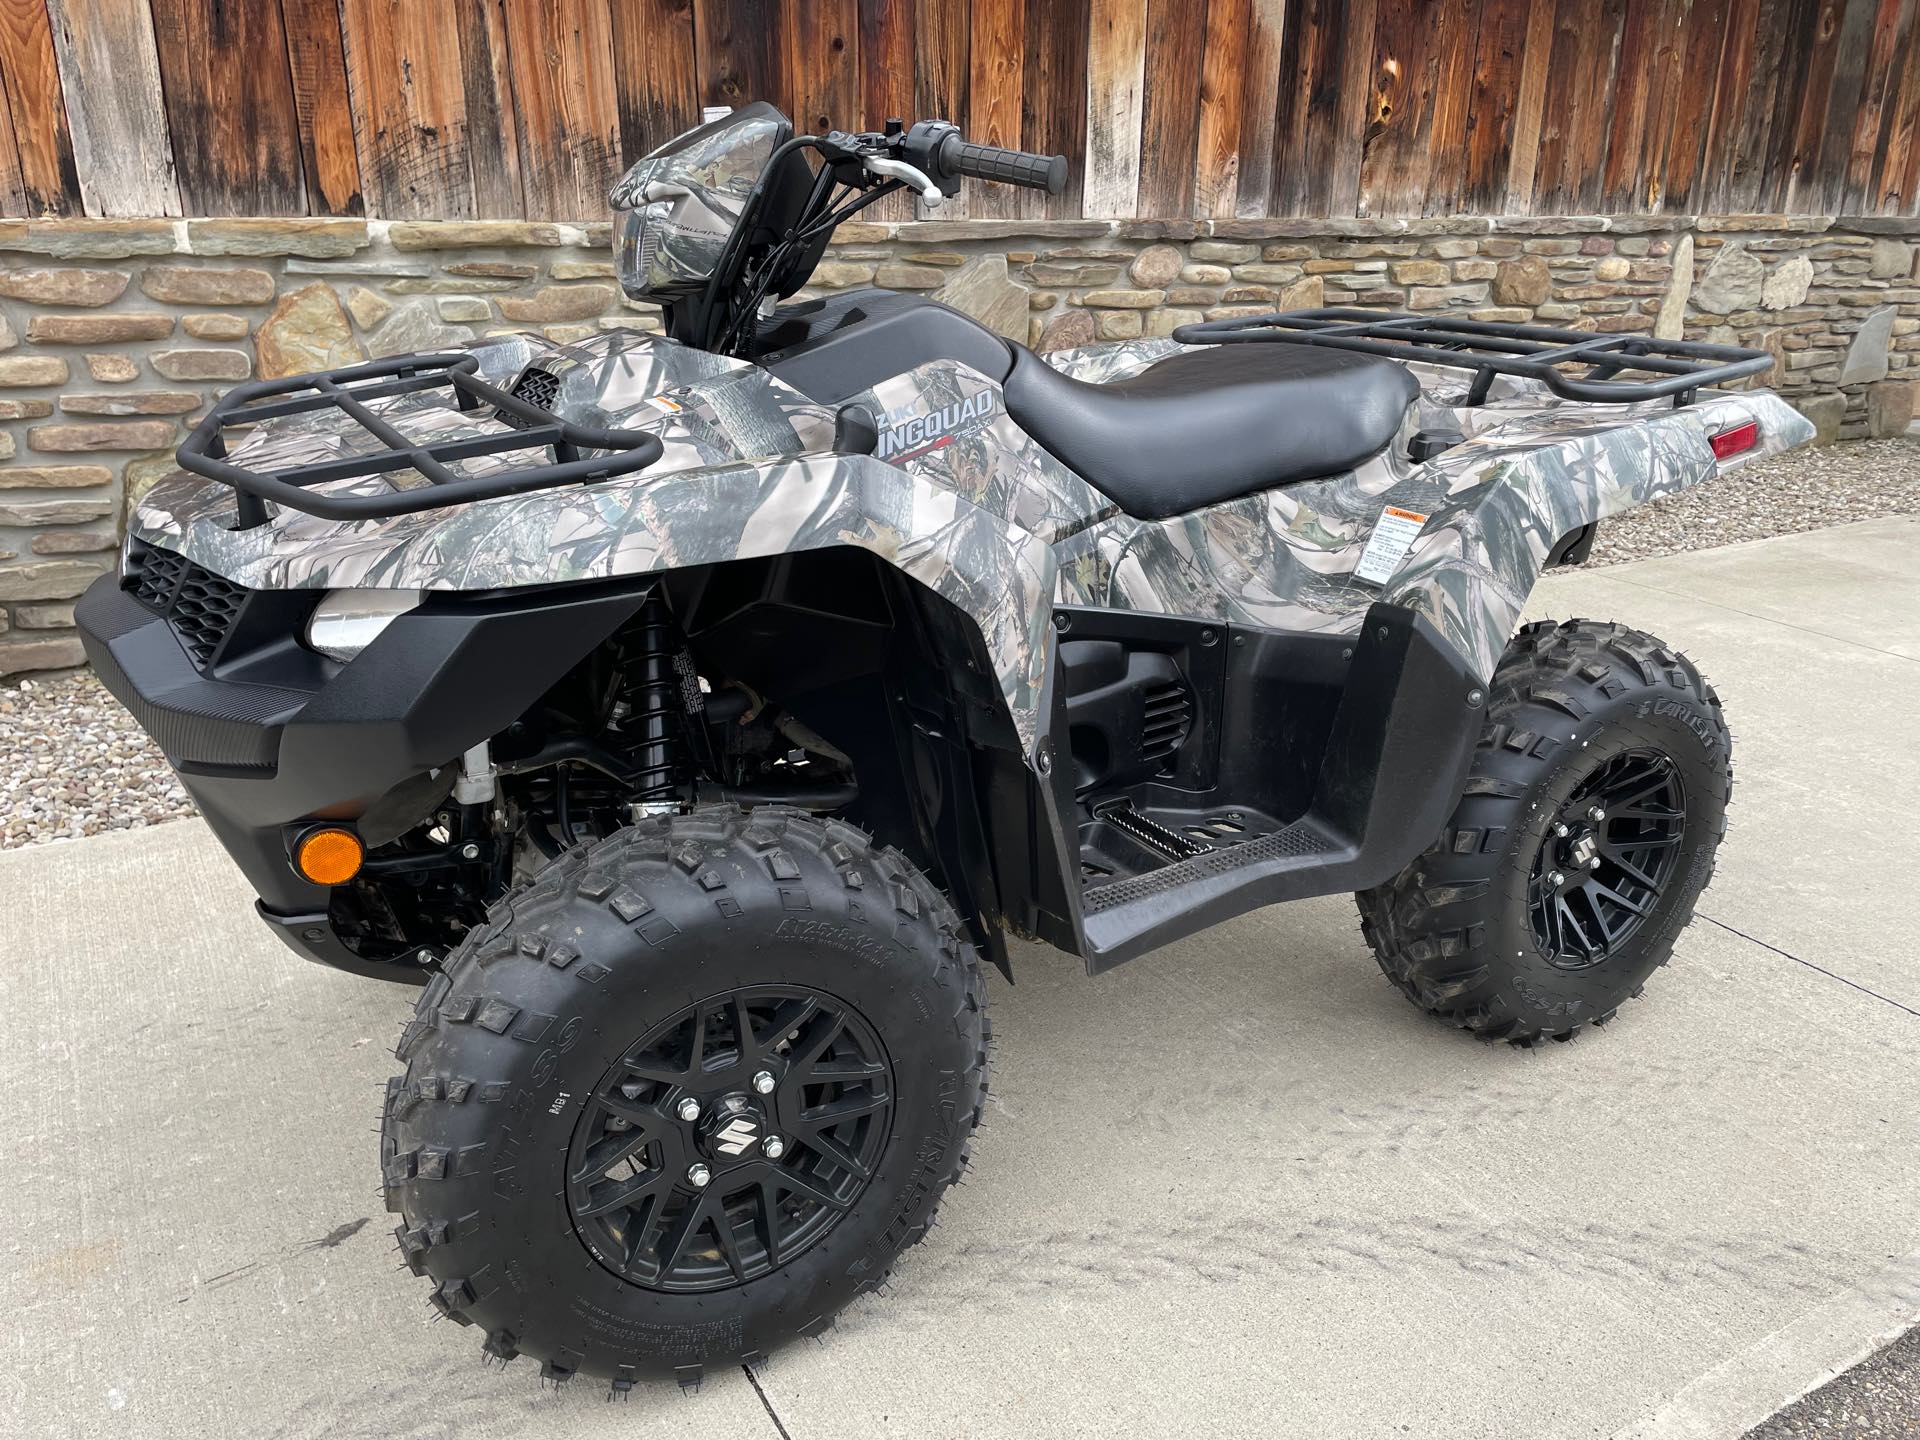 2020 Suzuki KingQuad 750 AXi Power Steering SE Camo at Arkport Cycles